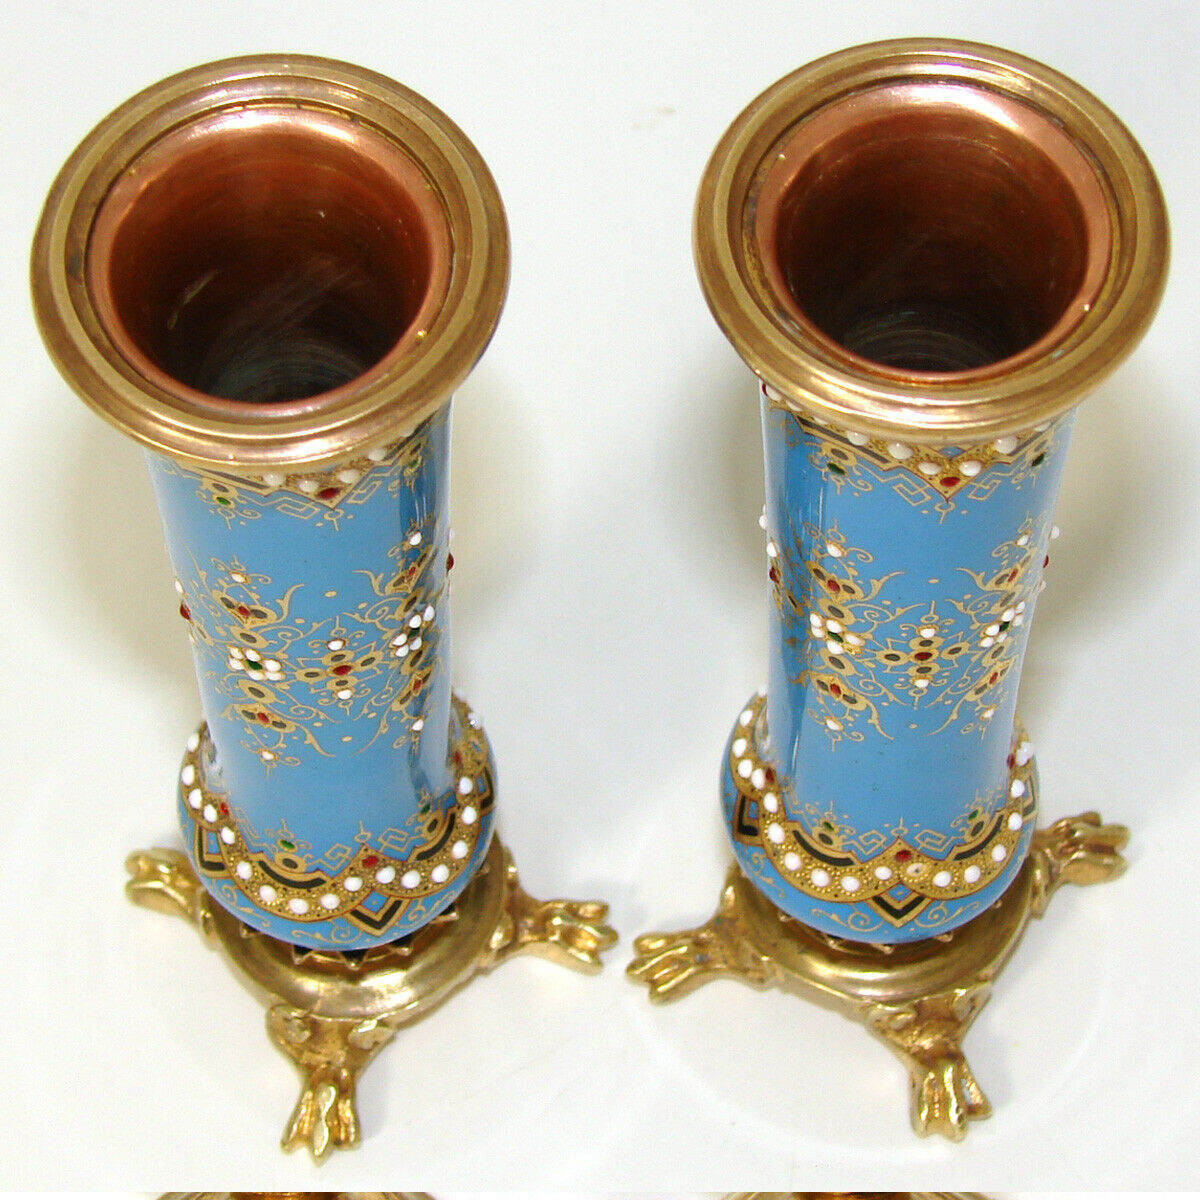 PAIR Antique French Sevres Enamel 4 3/8" Miniature Bud Vases, "Jeweled" Accents